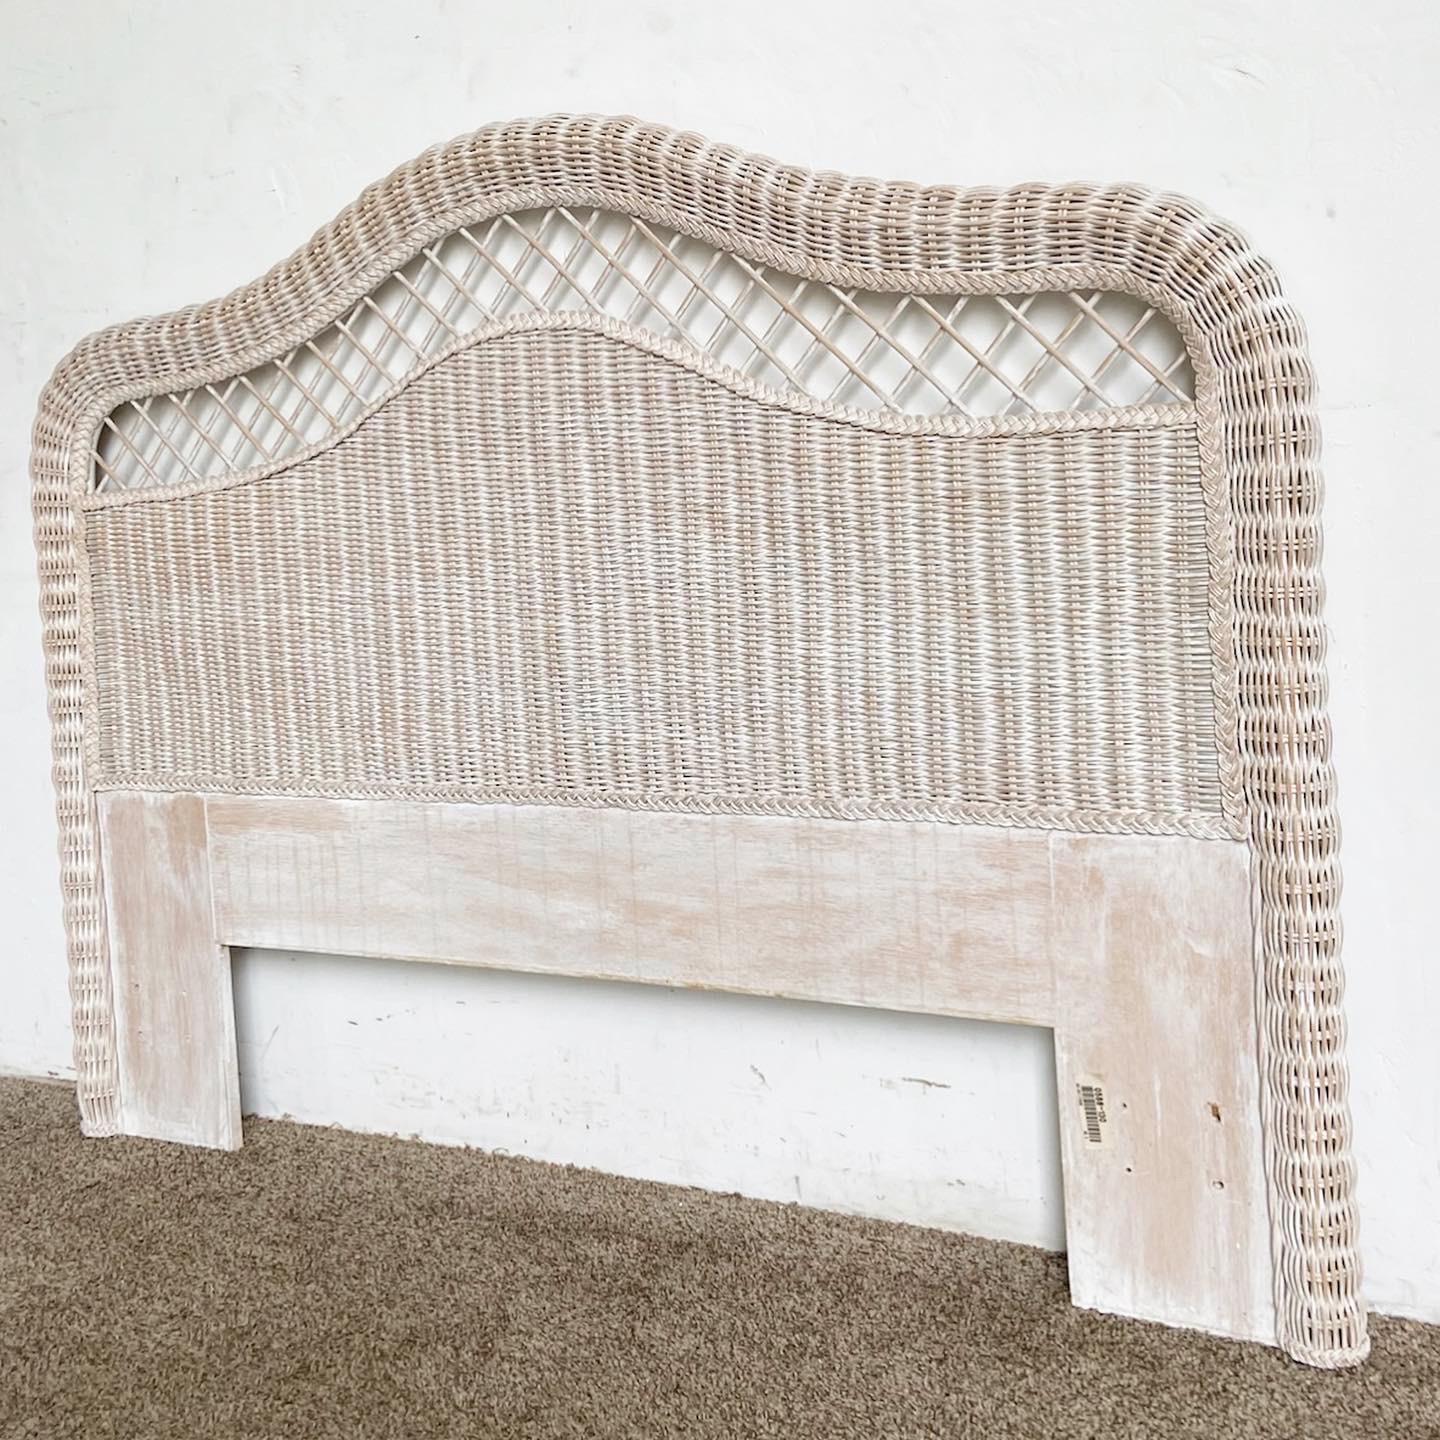 Our Boho Chic White Wash Queen Size Wicker Headboard combines breezy charm and bohemian elegance, making it the perfect anchor for your bedroom decor.

Beautiful wicker construction, whitewashed for a relaxed, beachy vibe.
Intricate weave pattern